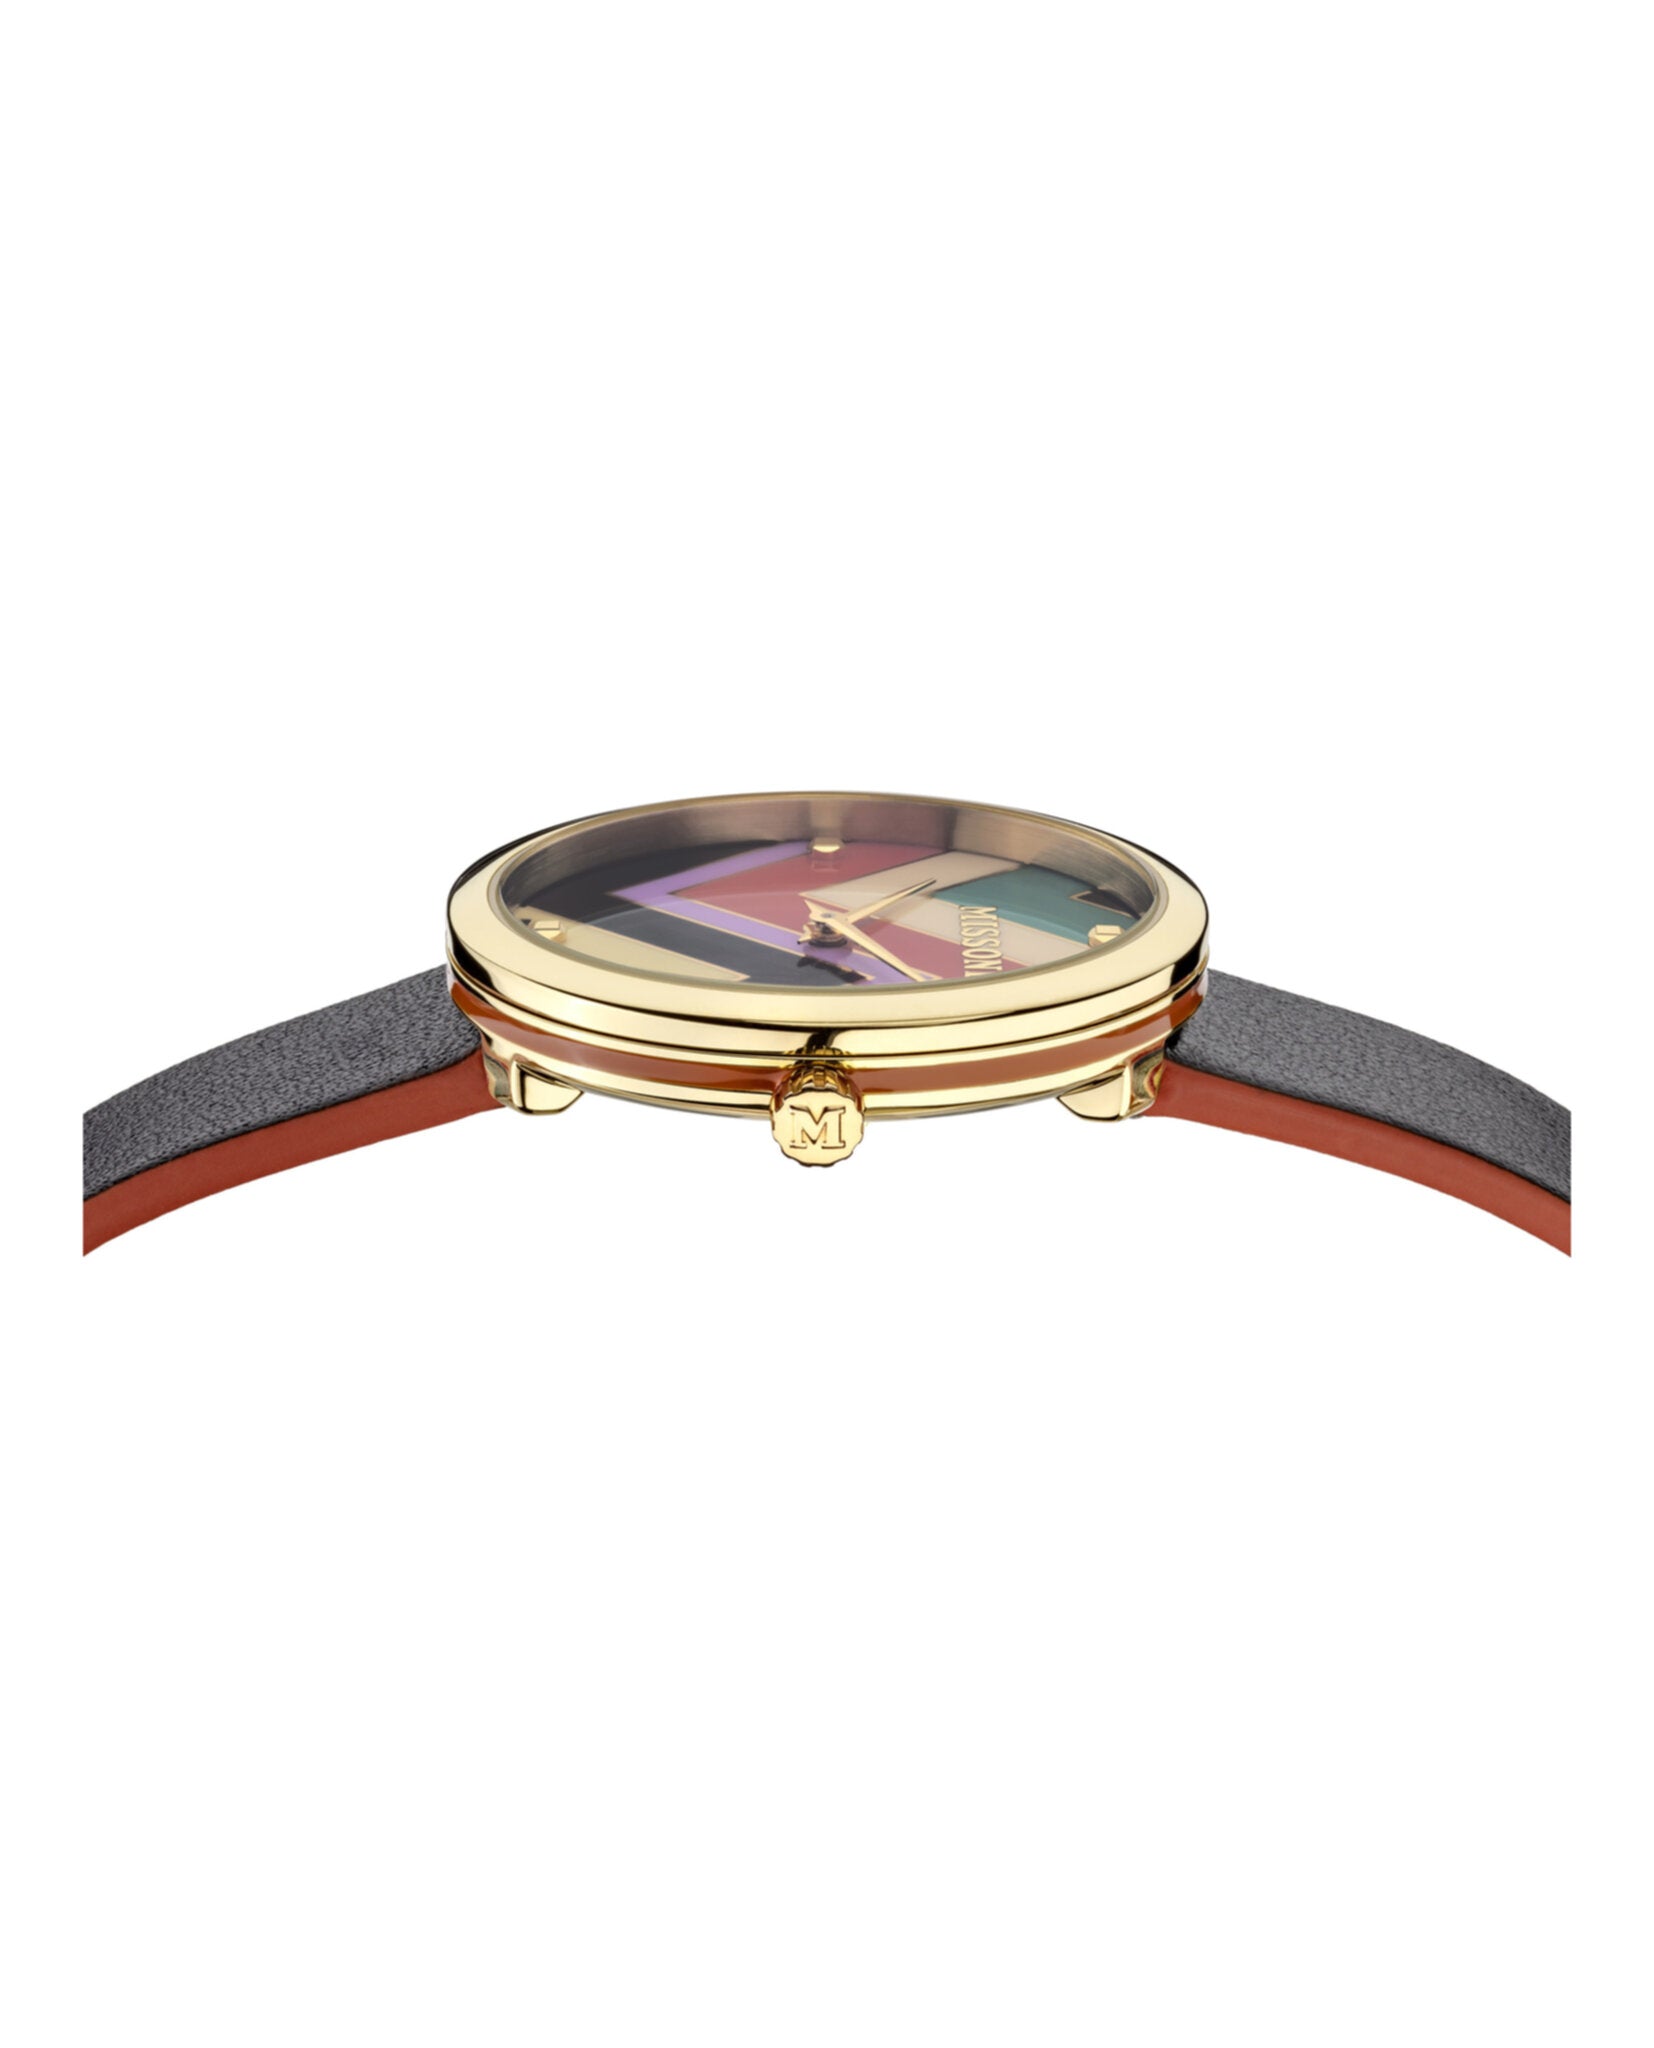 M1 Leather Watch